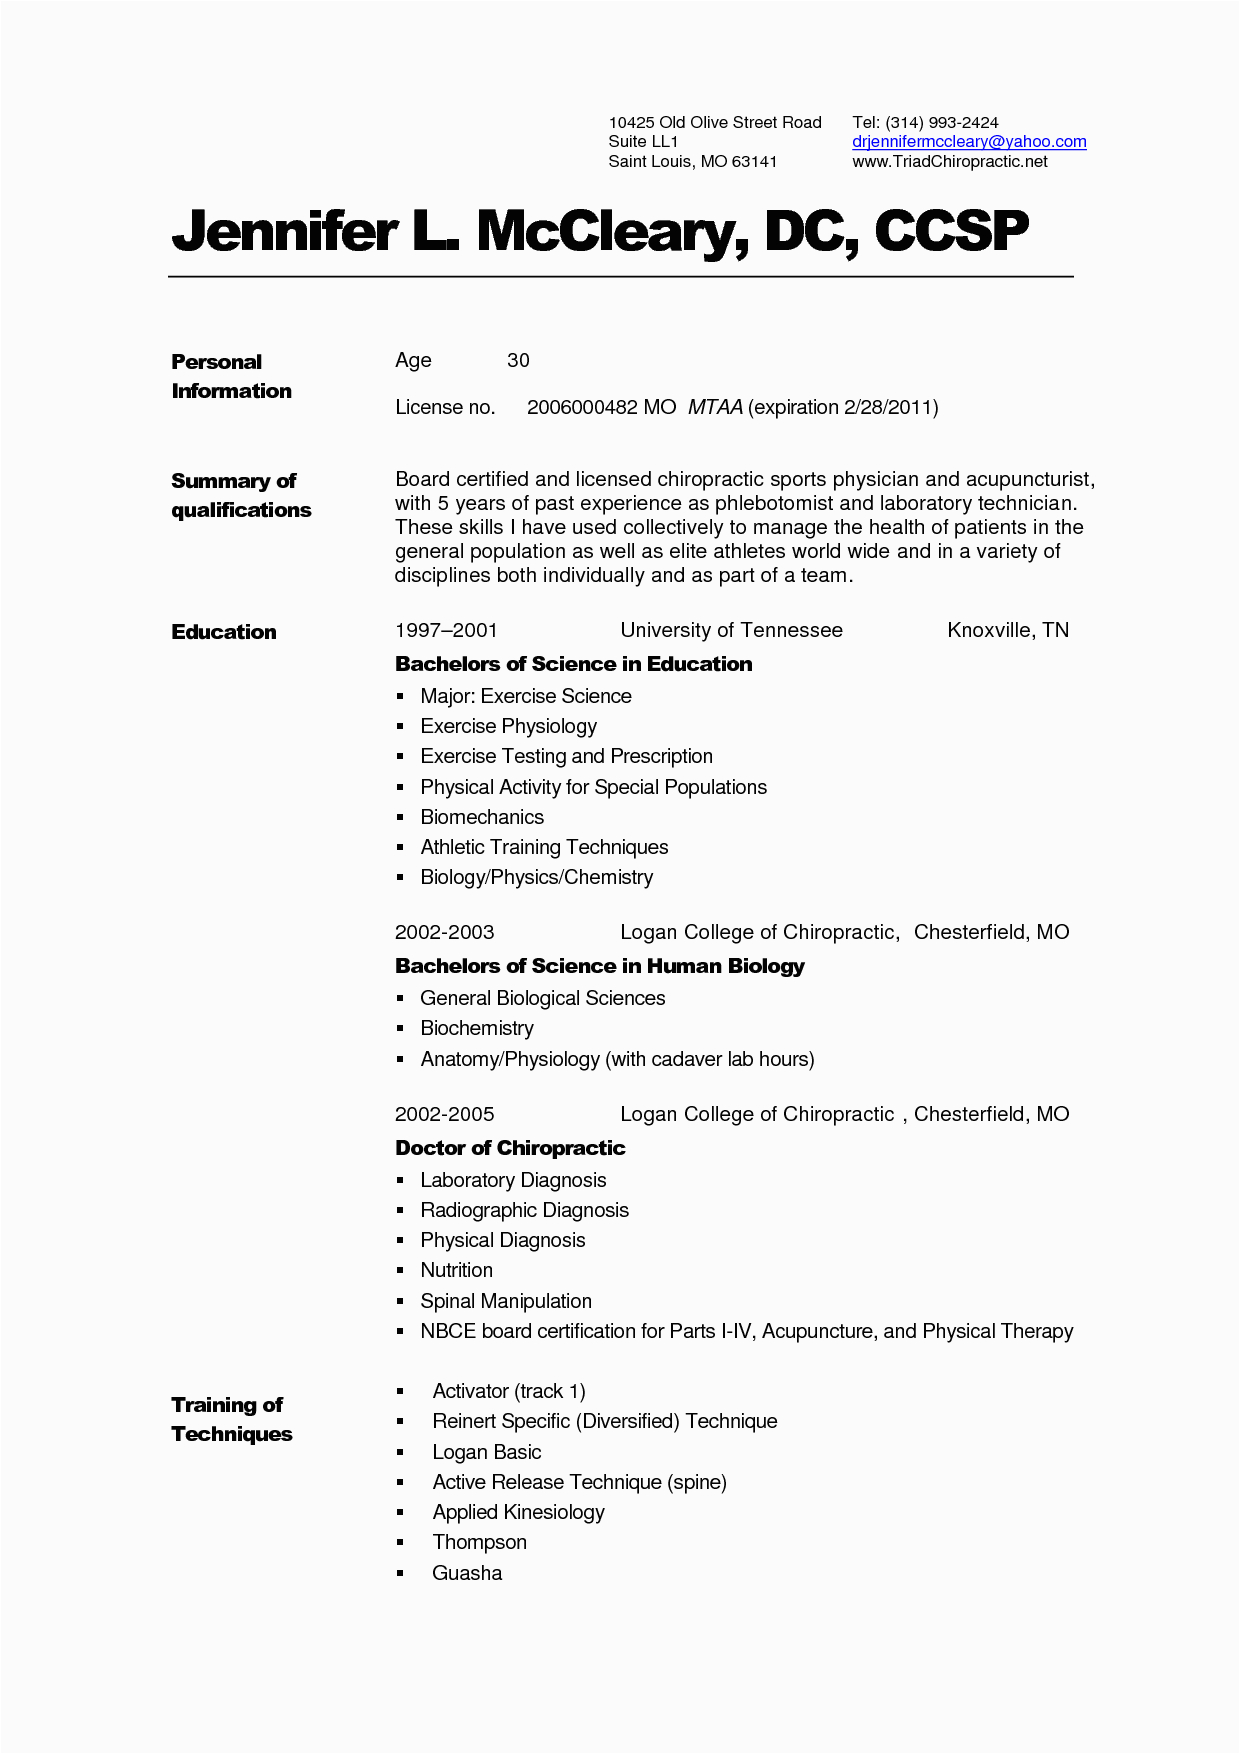 Sample Resume for Medical Student Getting Into Residency Cv Template Residency Resume Examples